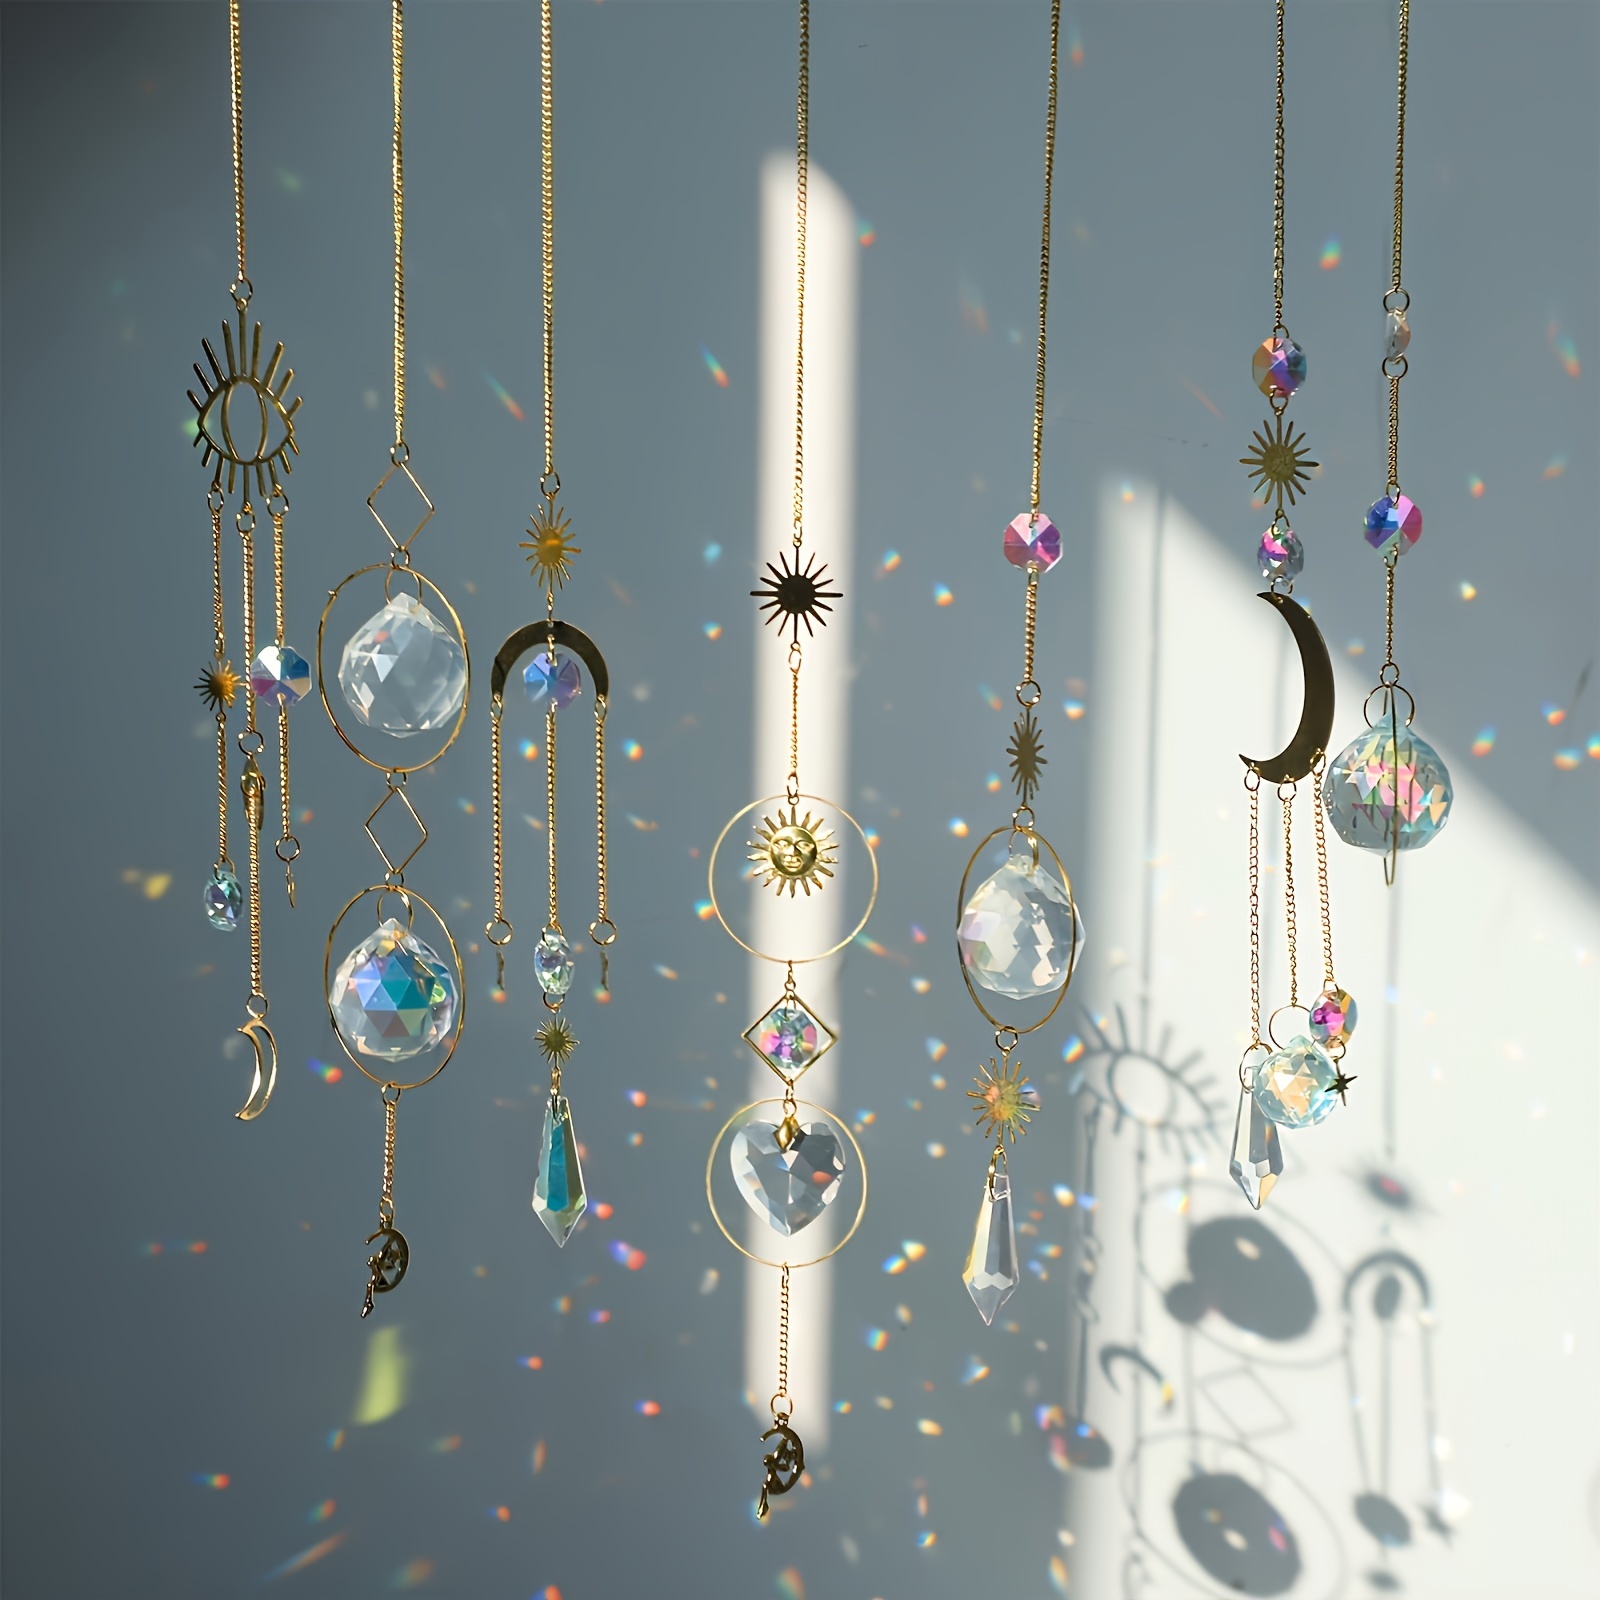 

7 Pcs Crystal Hanging Sun Catchers: Golden Moon & Star Sun Catchers With Chain, Colorful Crystal Glass Balls For Window, Bedroom, Car, Home, Garden, Office - Wedding Decoration